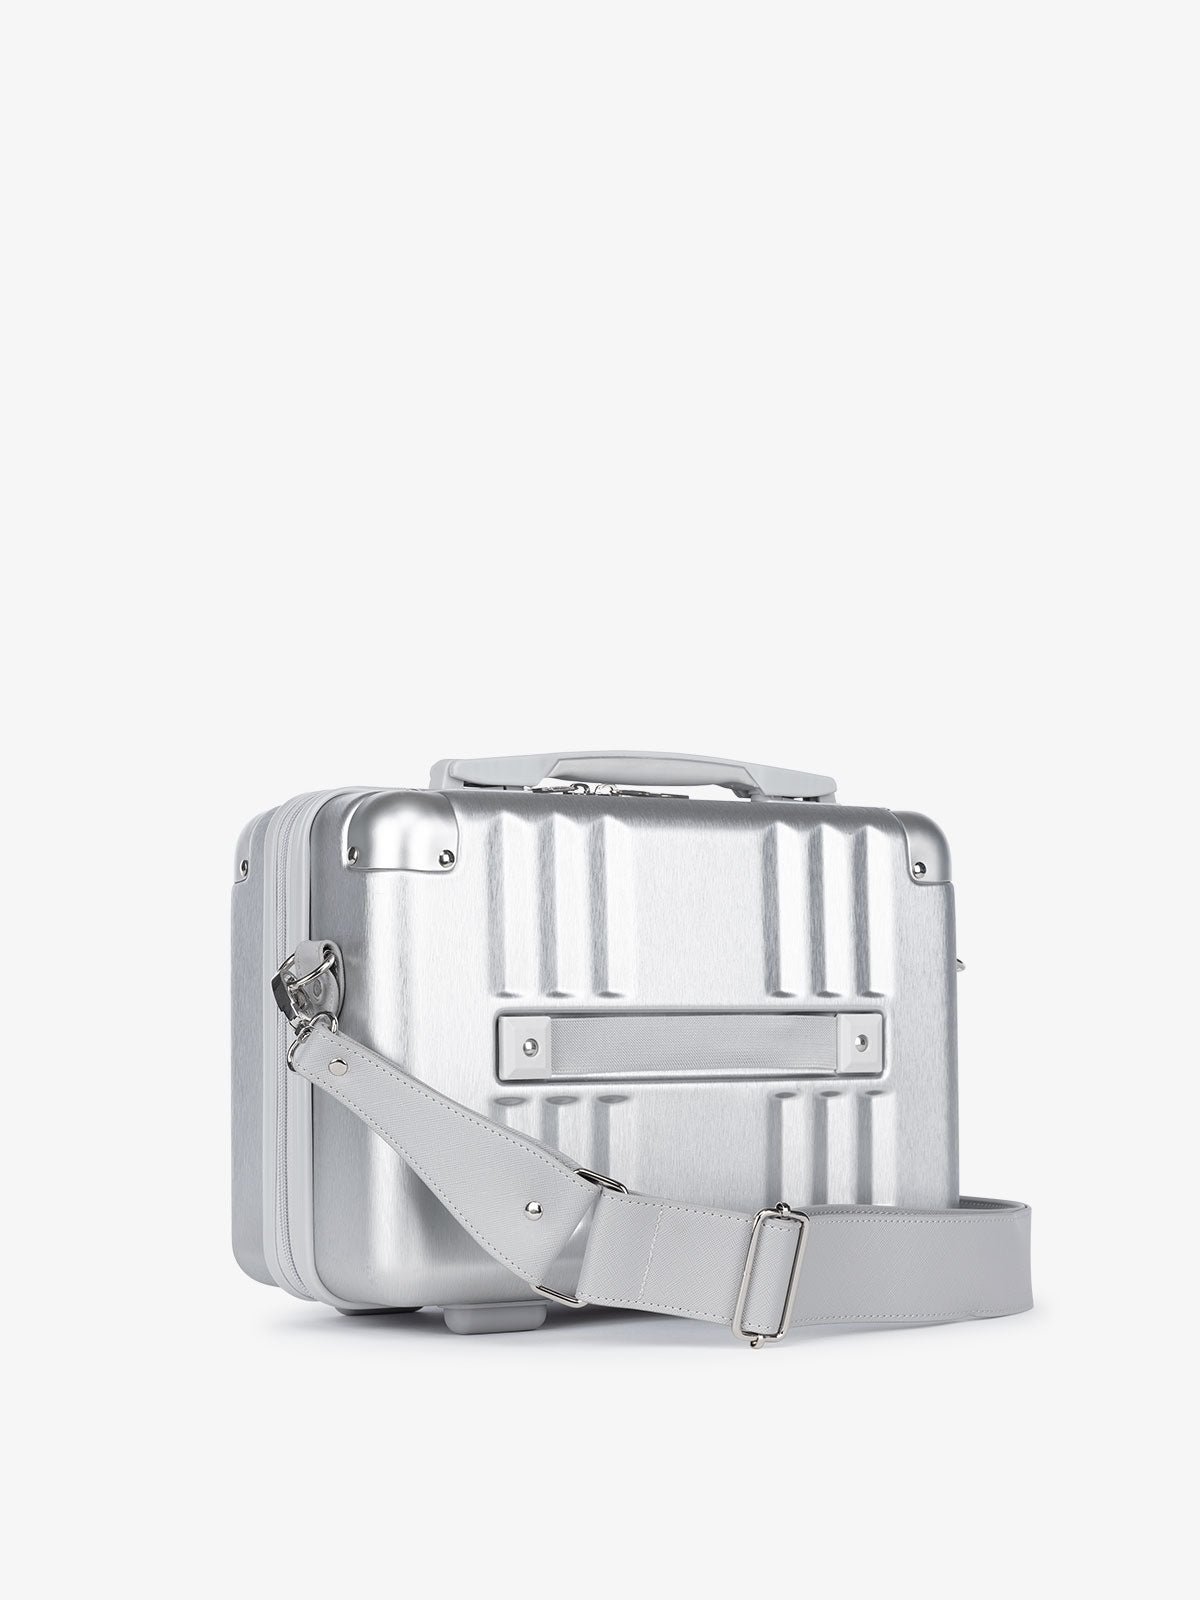 CALPAK Ambeur silver travel vanity case with carrying strap